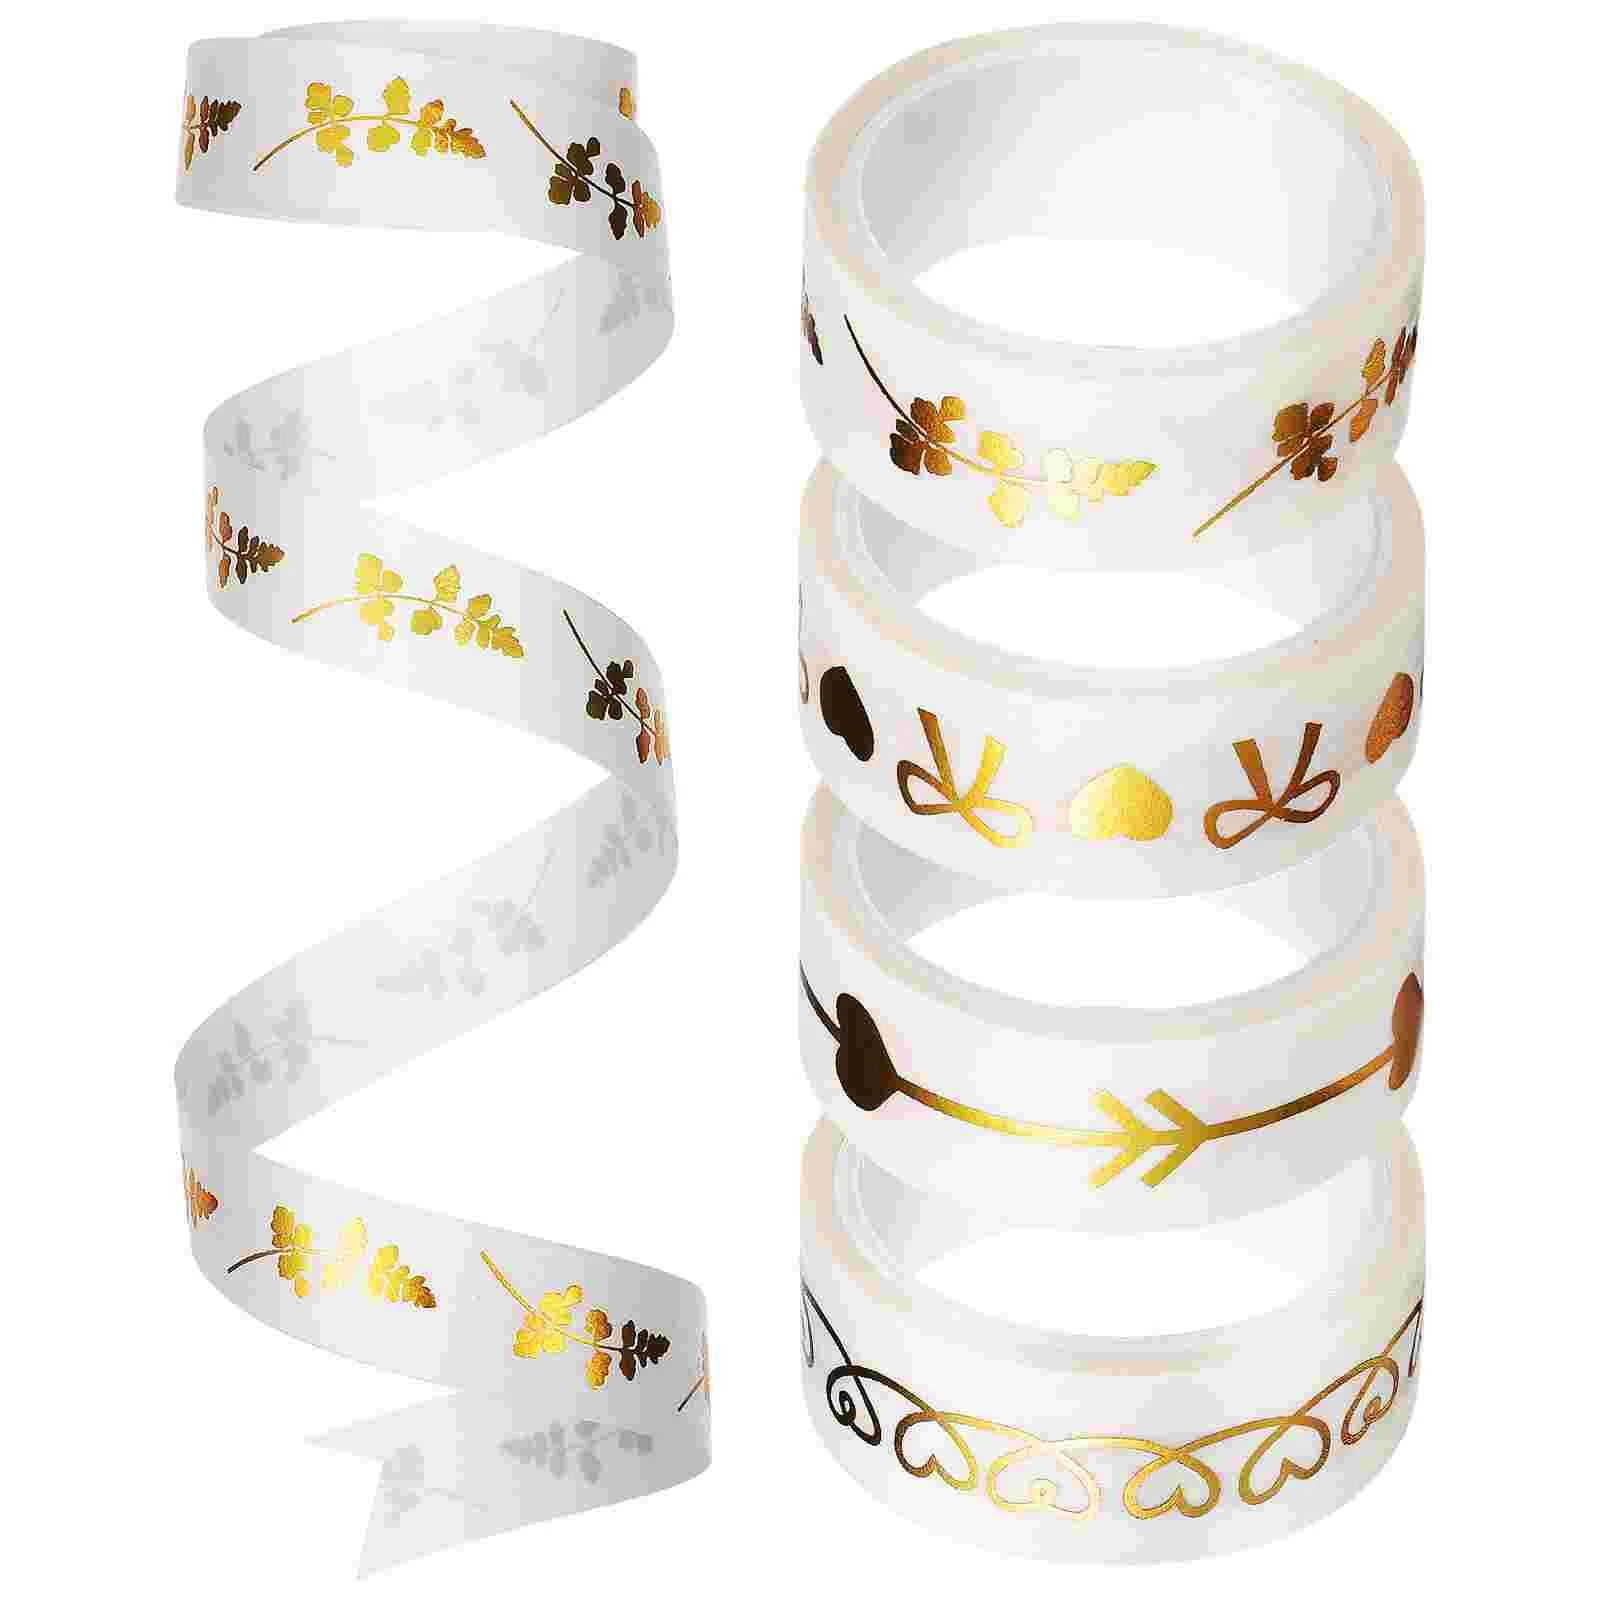 

5 Rolls Adhesive Tape Decorative Crafts Hand Washi Journaling Vintage Stickers Tapes Stickers Paper Tool Masking Taping Tools